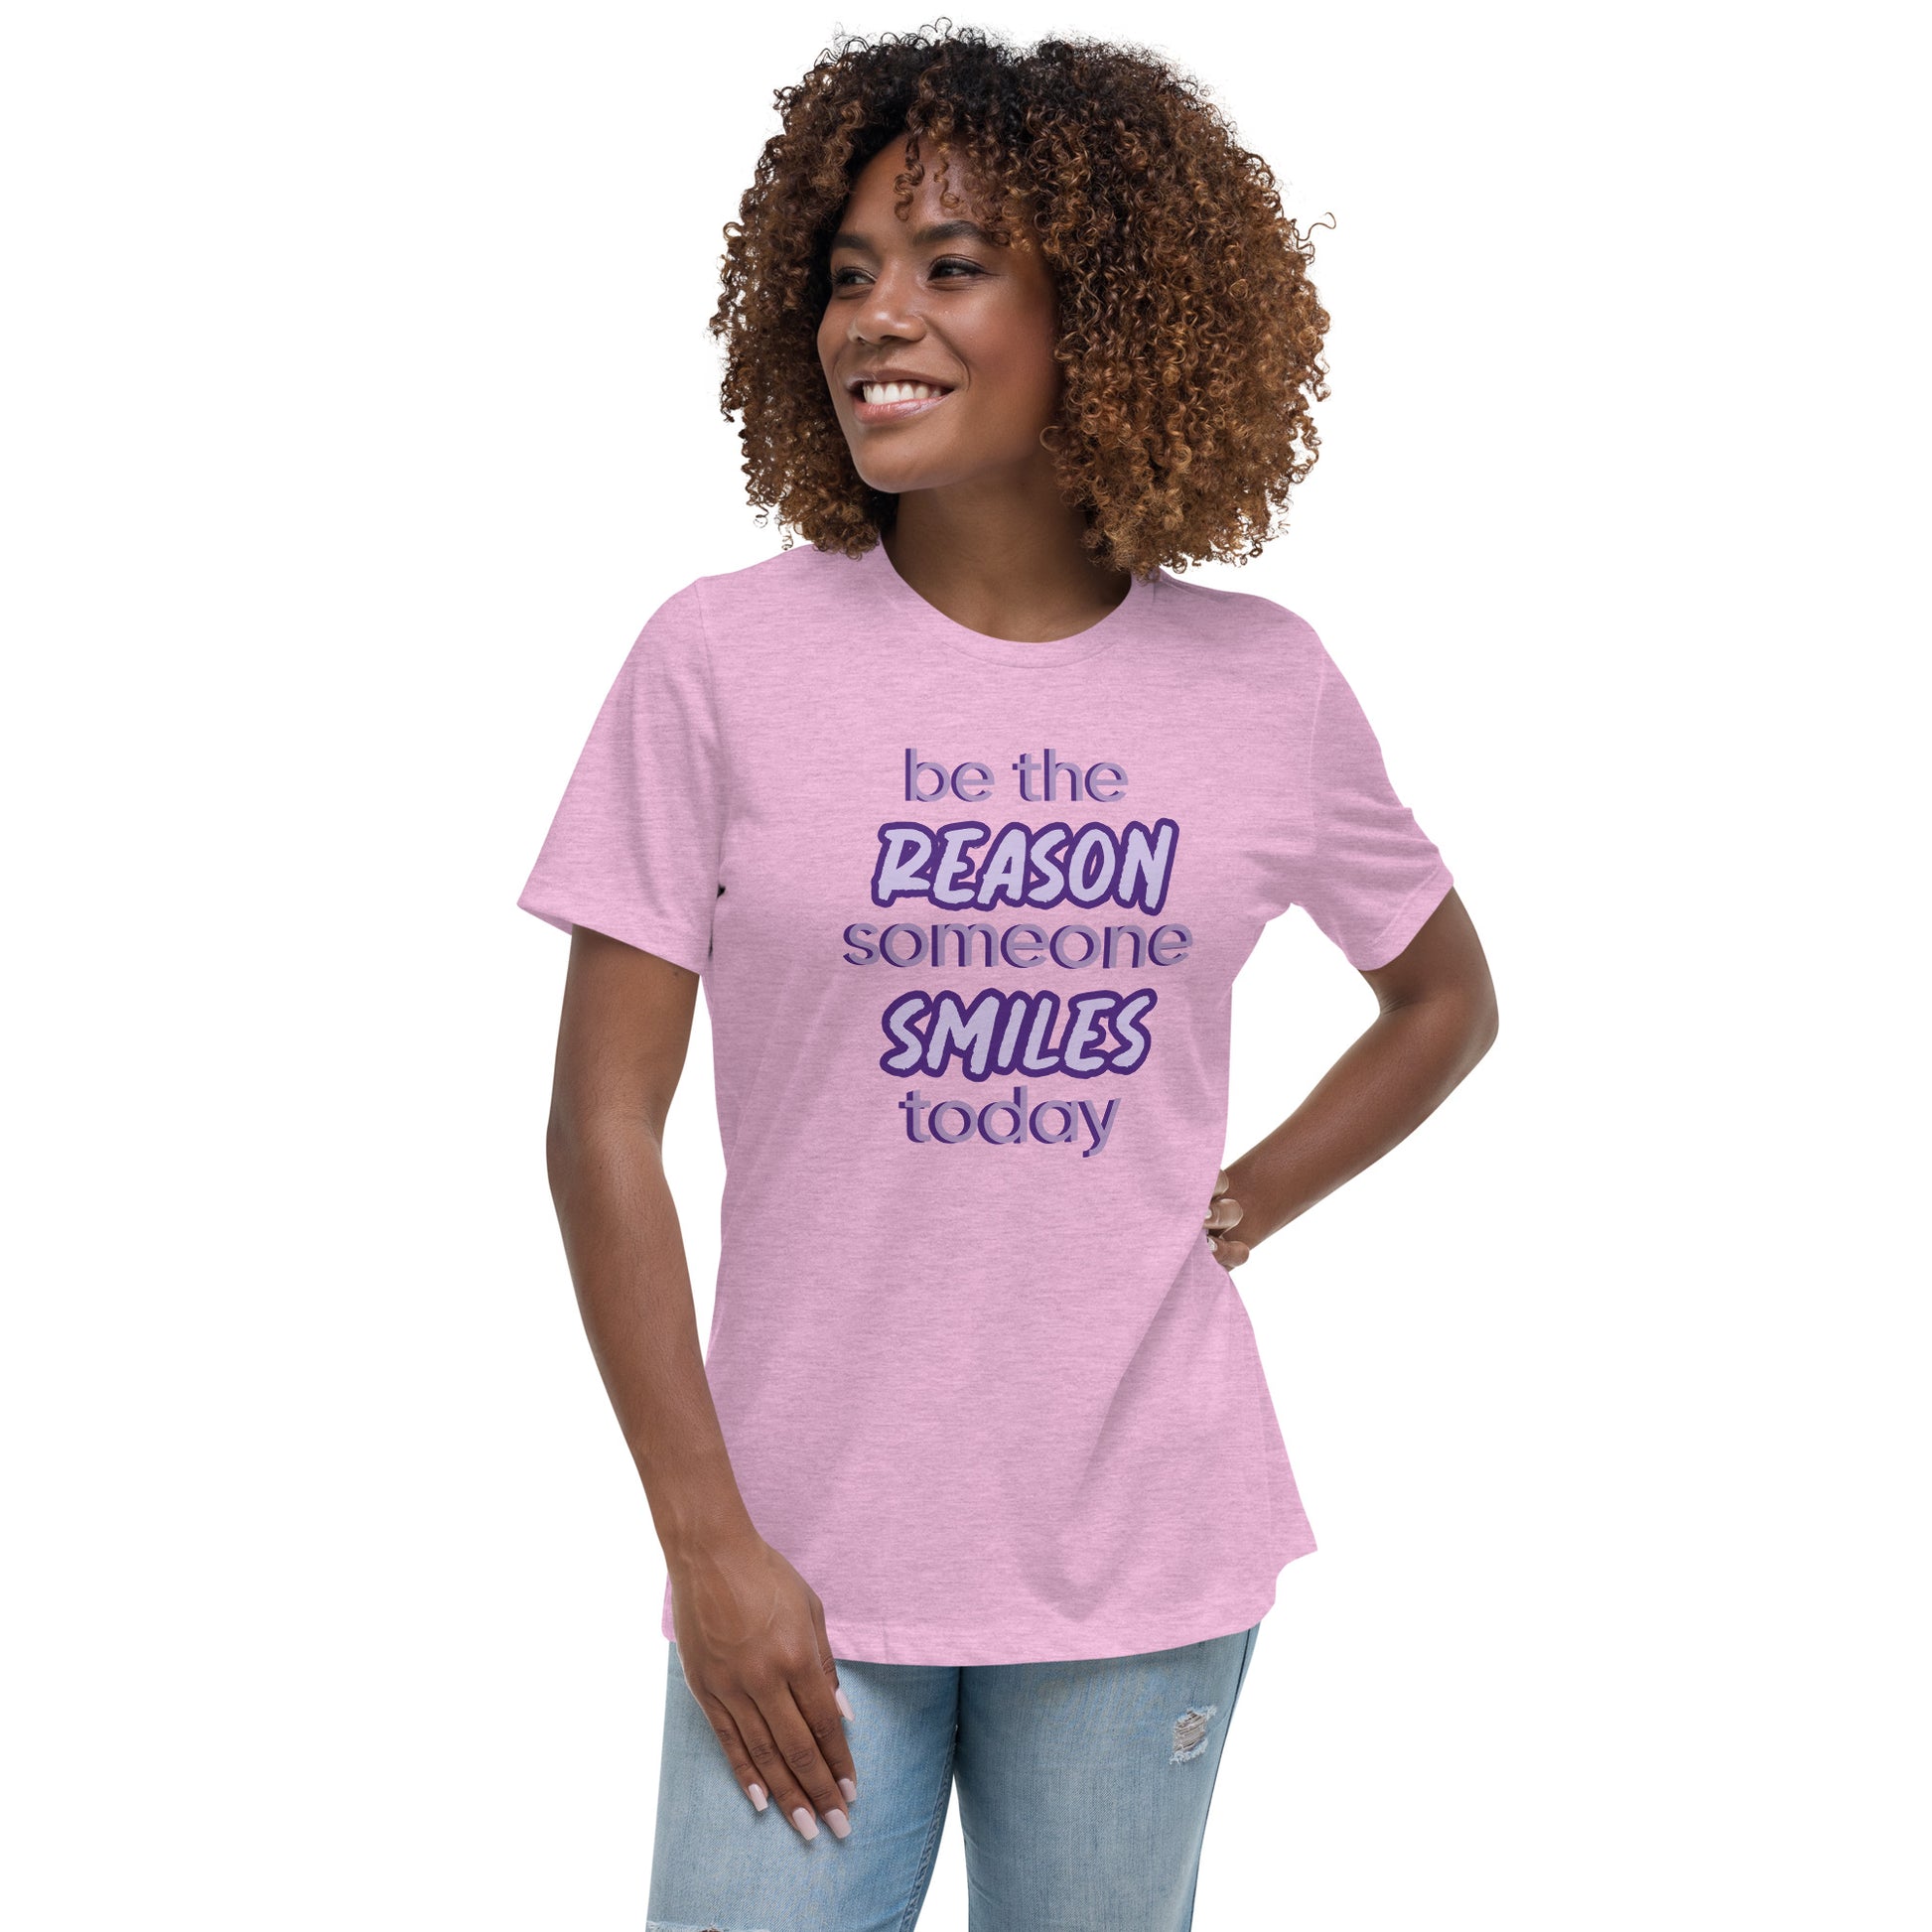 Woman with prism lilac T-shirt and the quote "be the reason someone smiles today" in purple on it. 